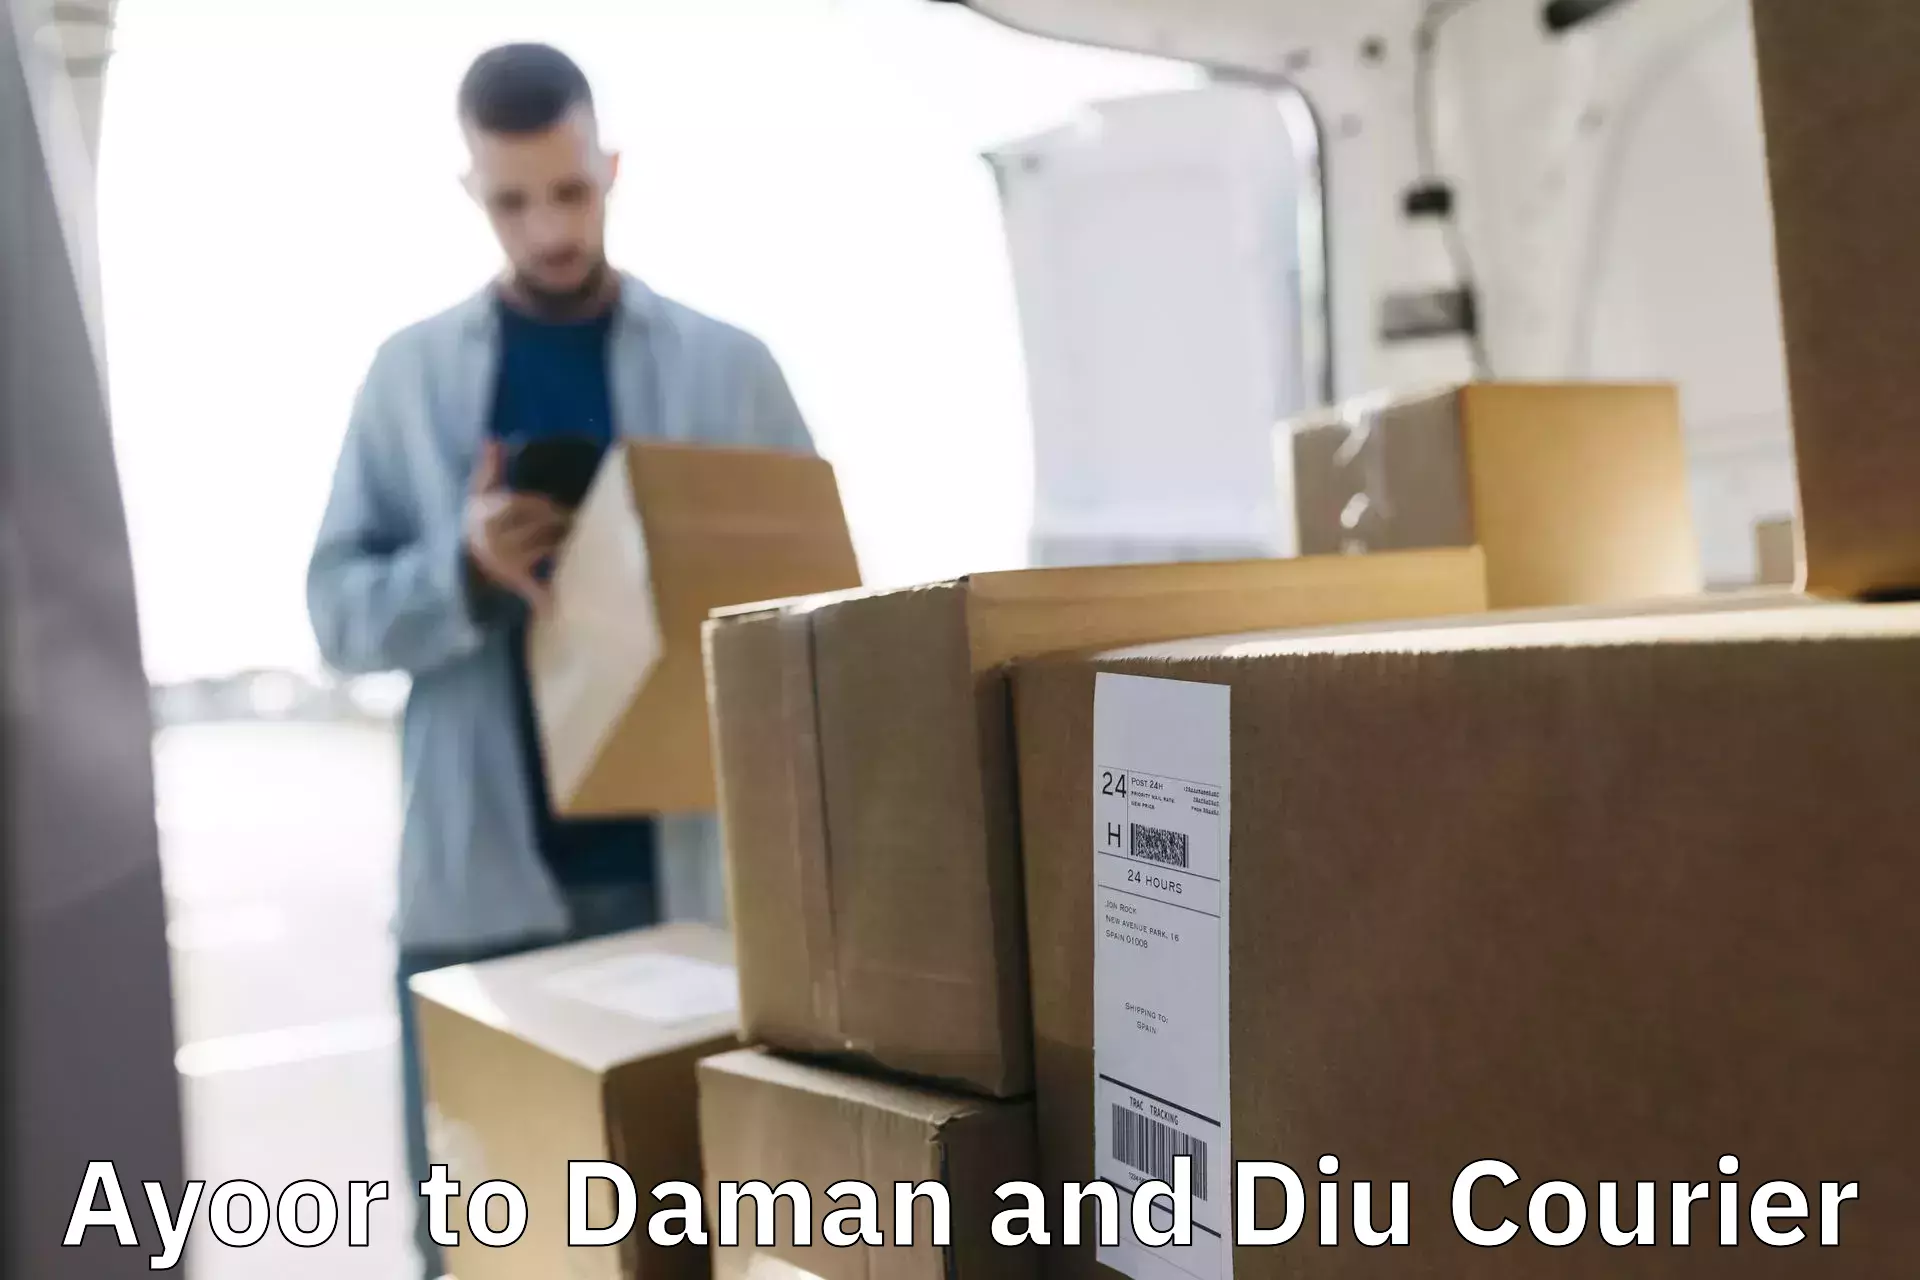 Next day courier Ayoor to Daman and Diu